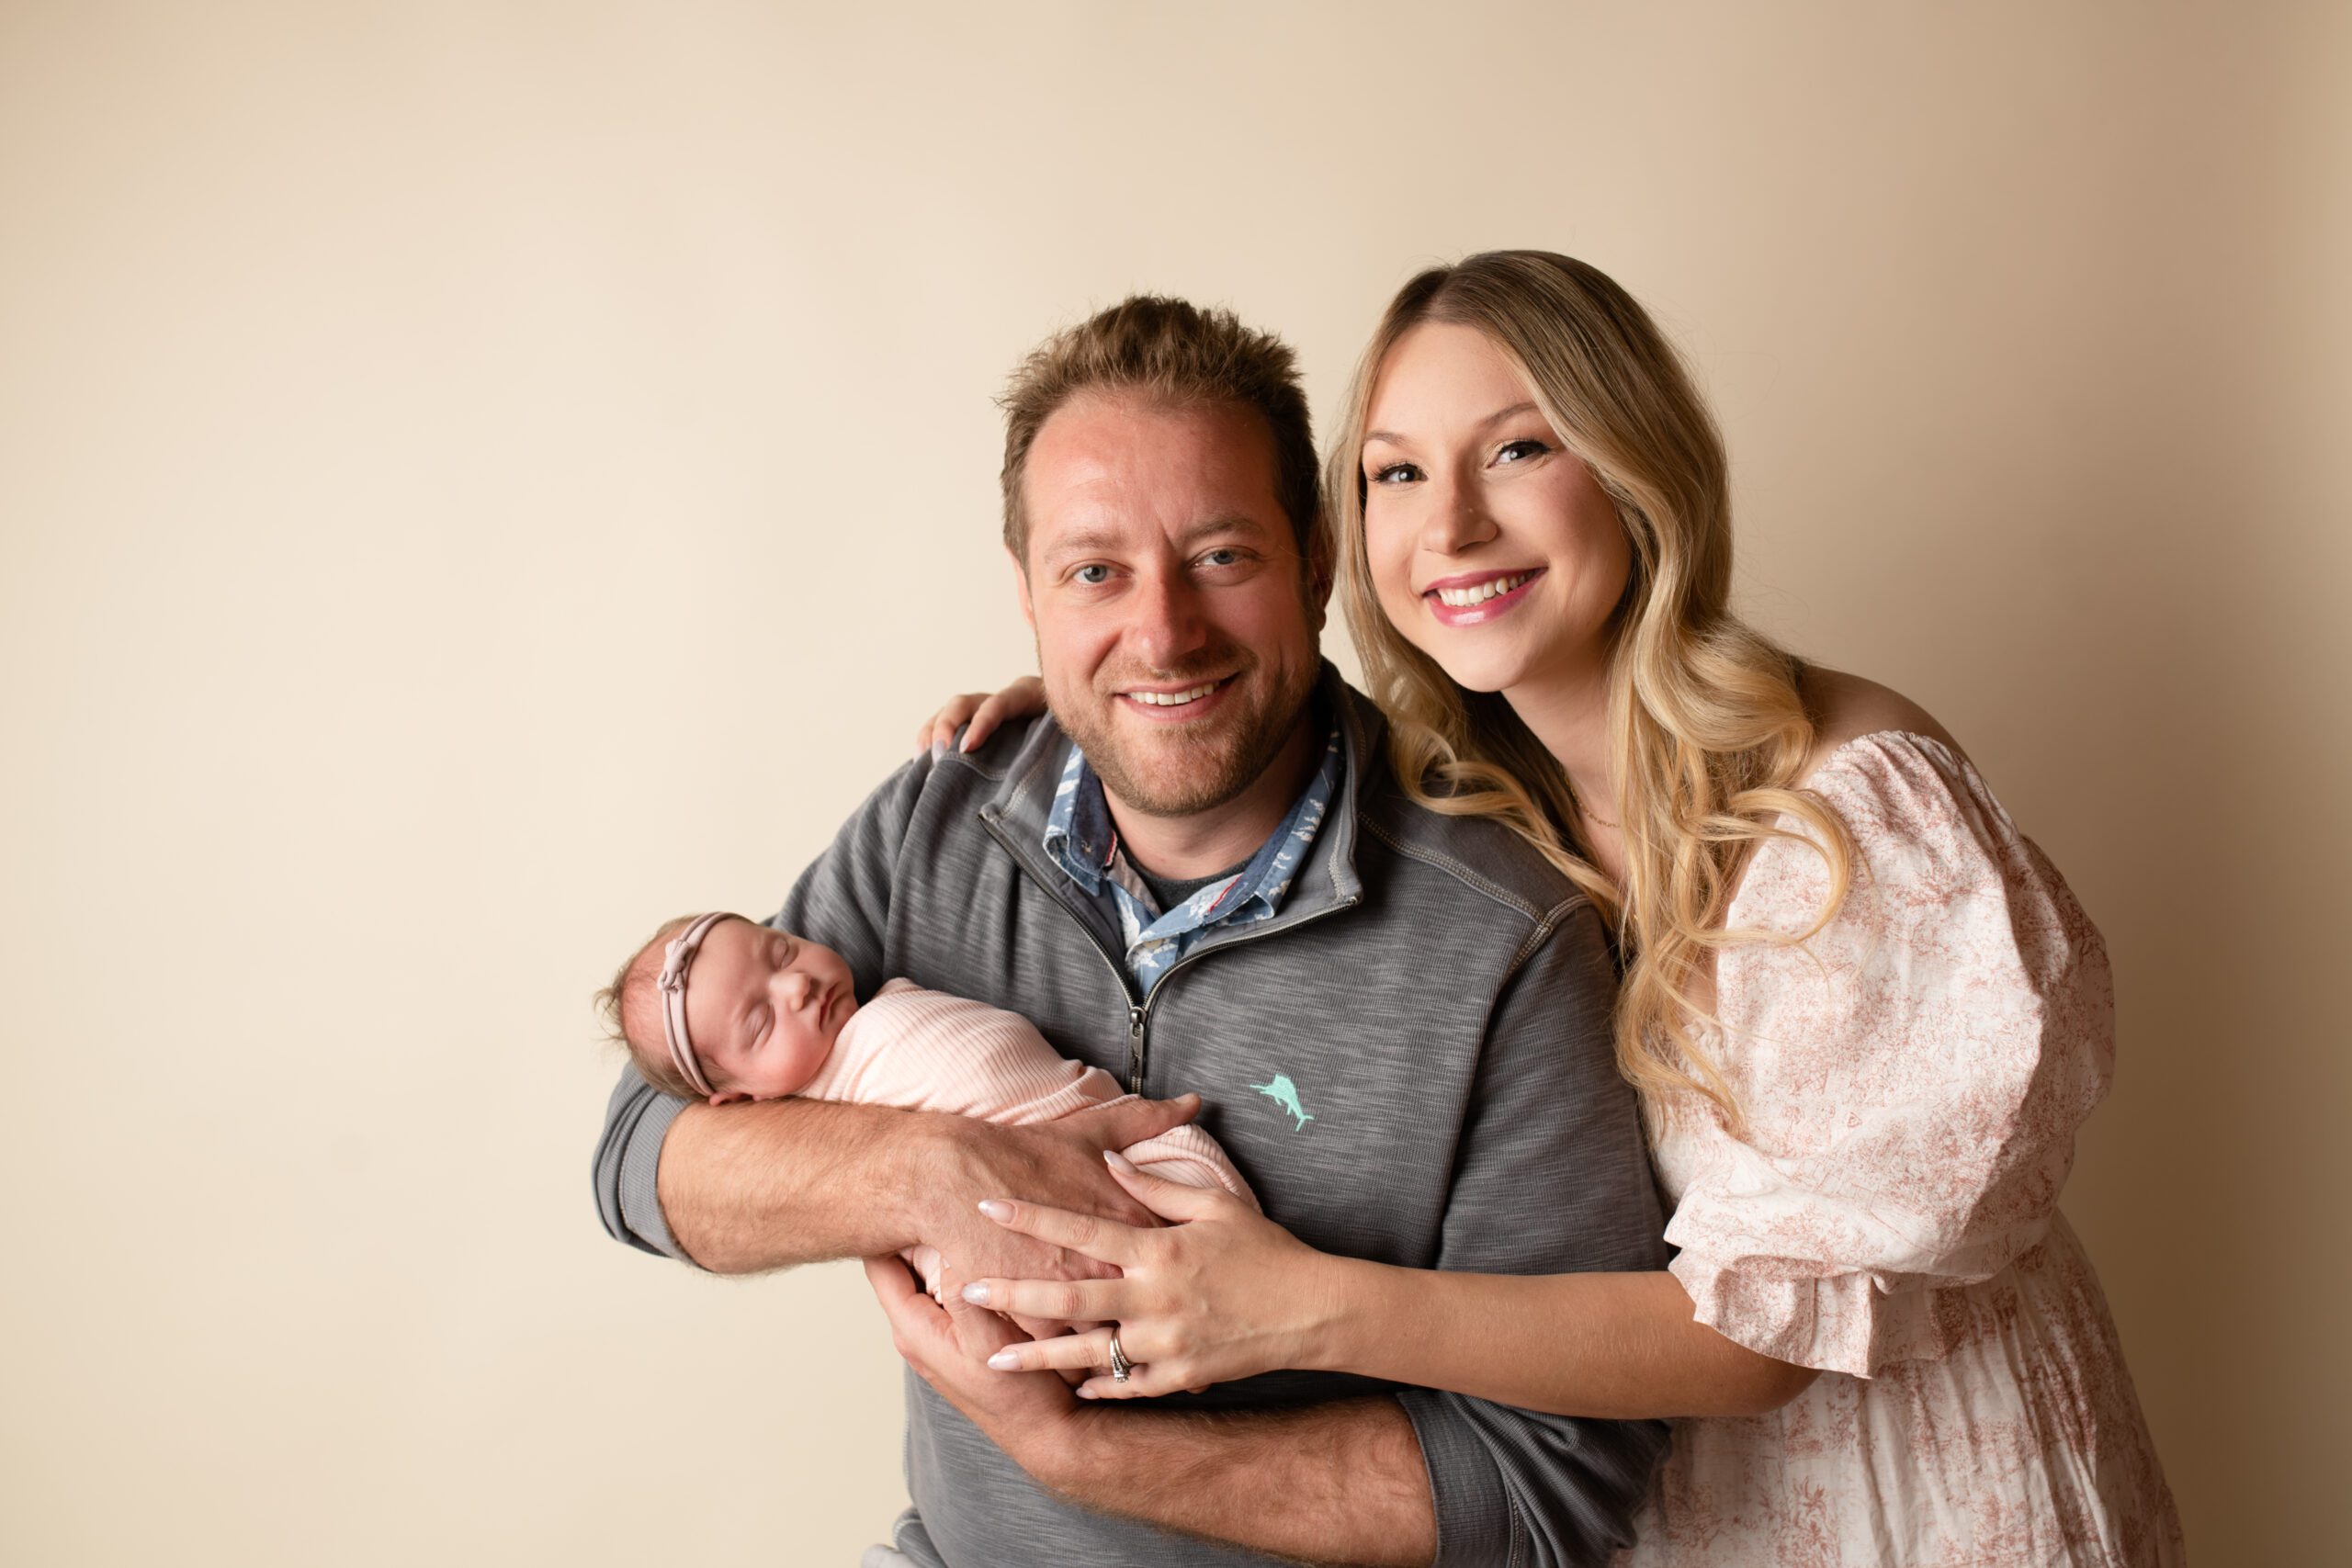 a new family of three in milwaukee photo studio. dad is holding onto newborn girl and mom is leading in towards dad. parents are smiling and baby is asleep in dads arms with light pink swaddle fabric
